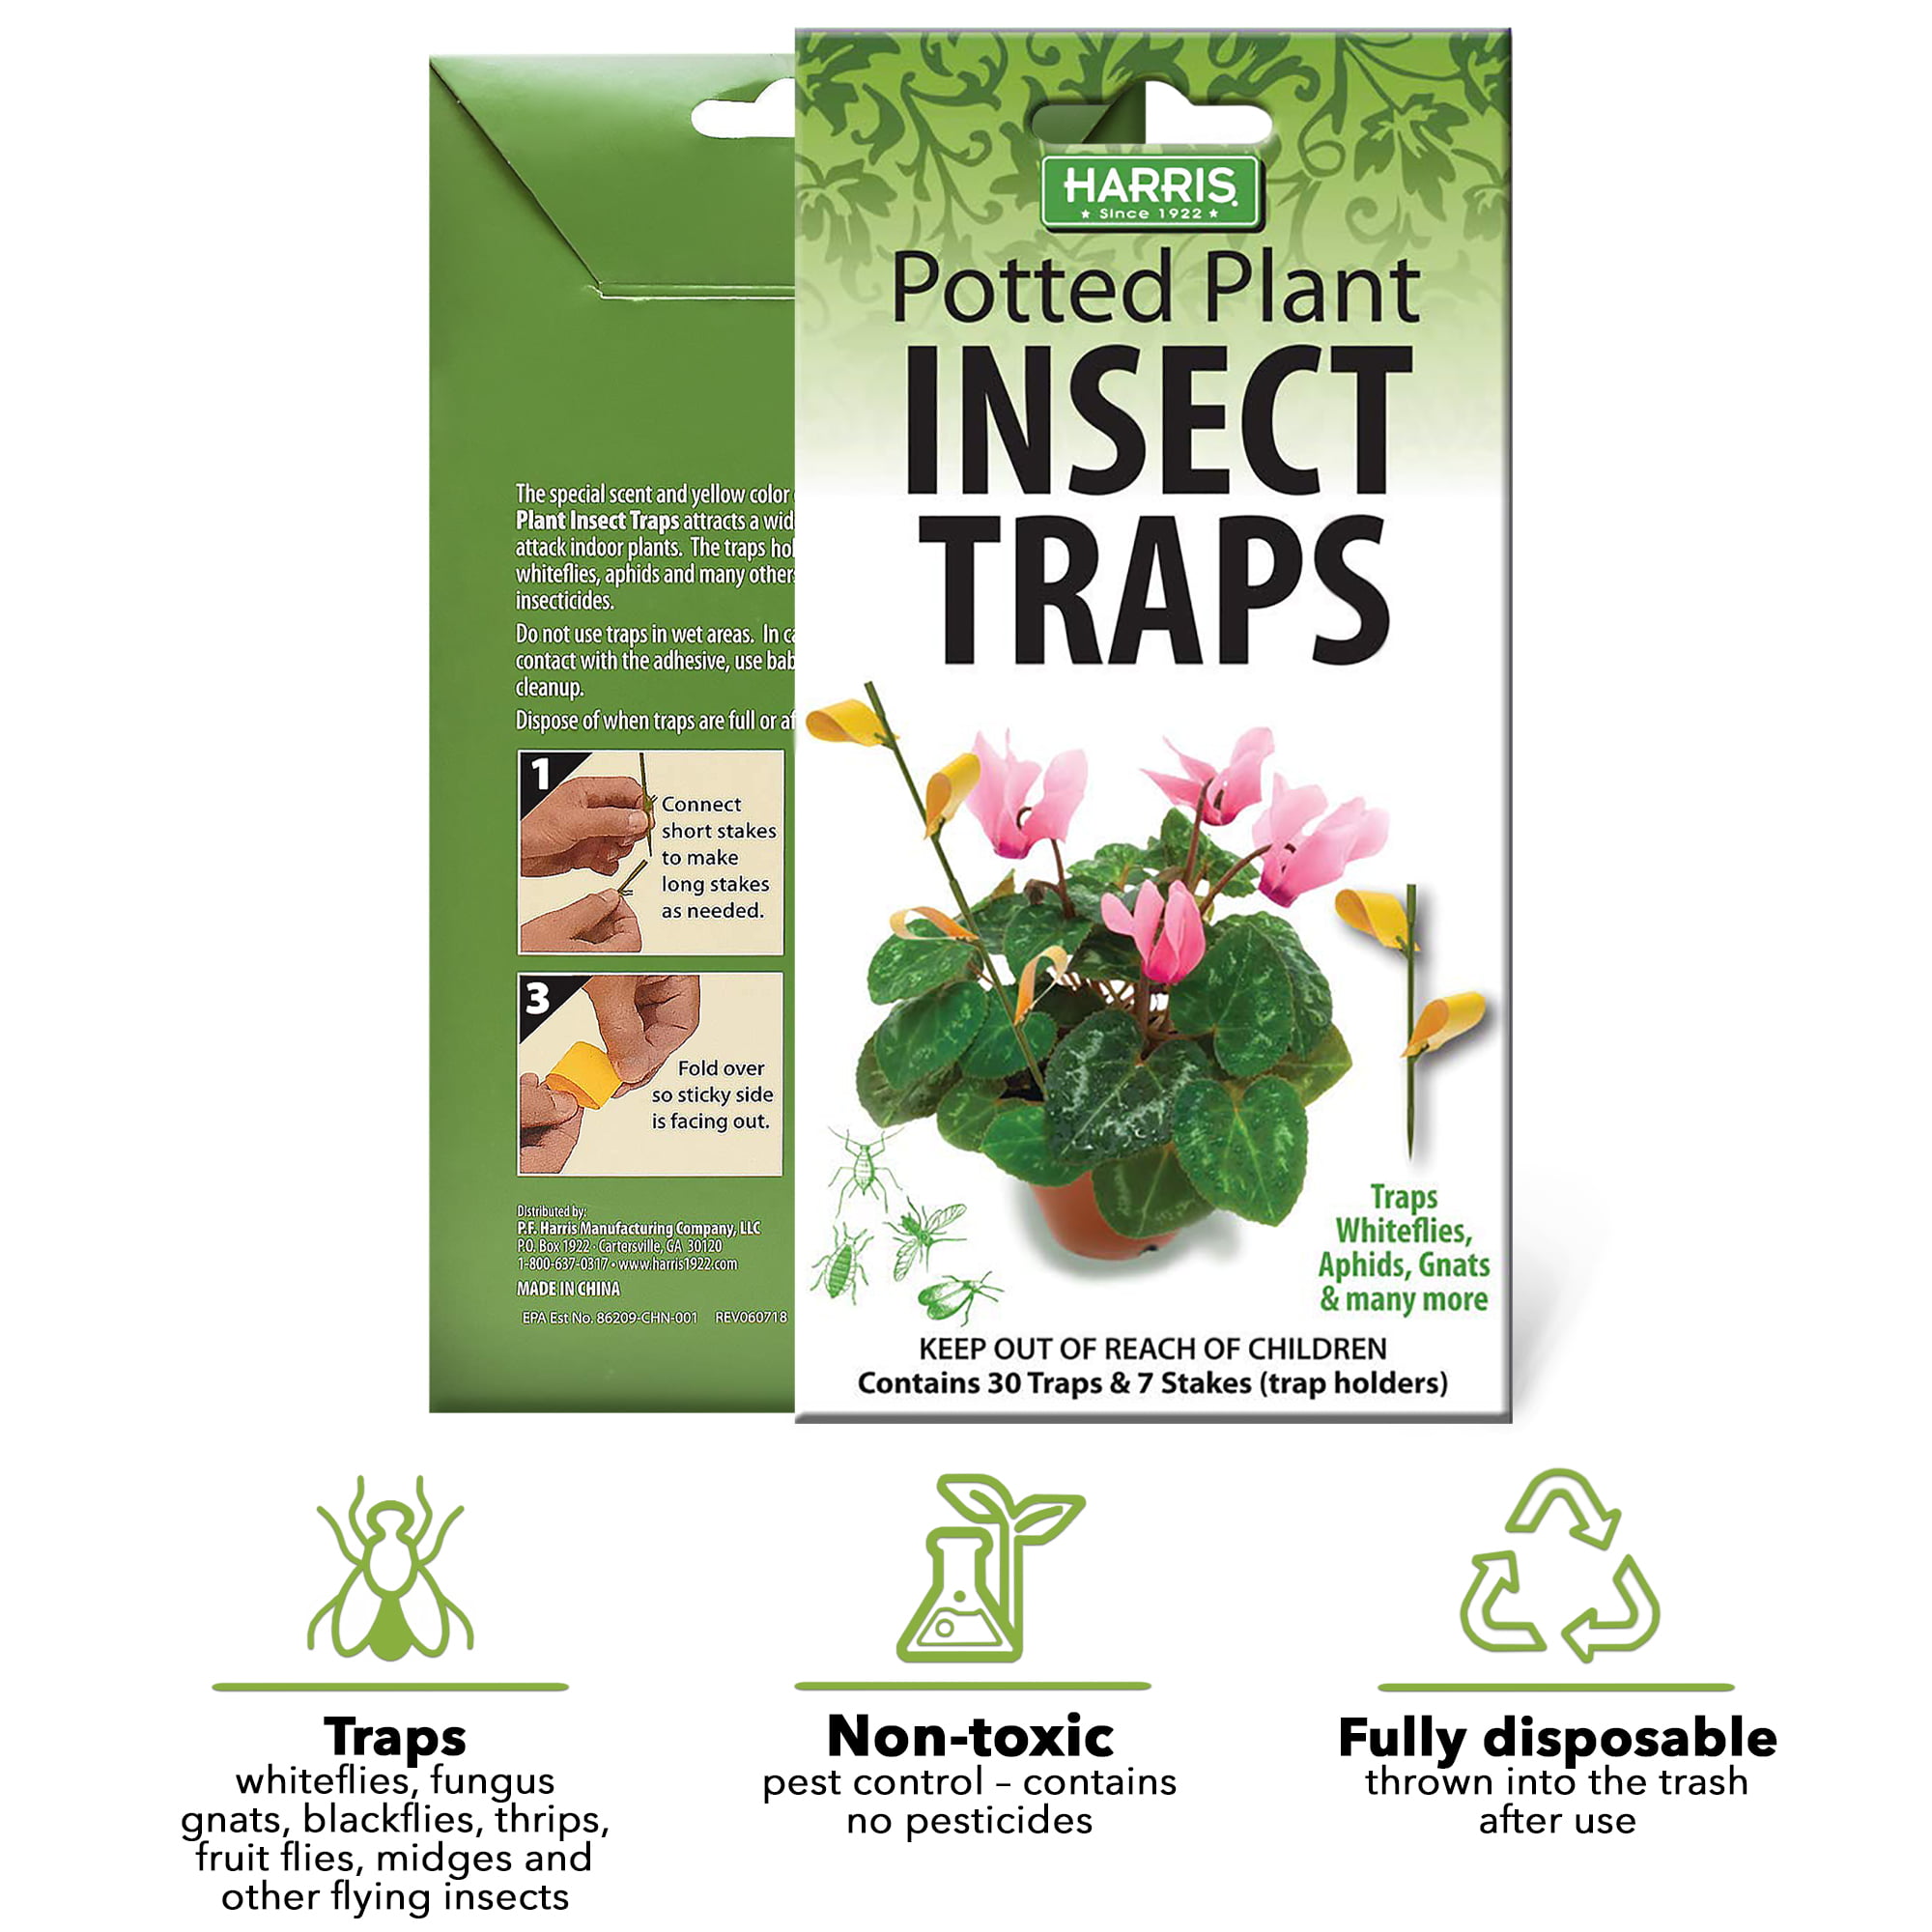 Harris Potted Plant Insect Traps